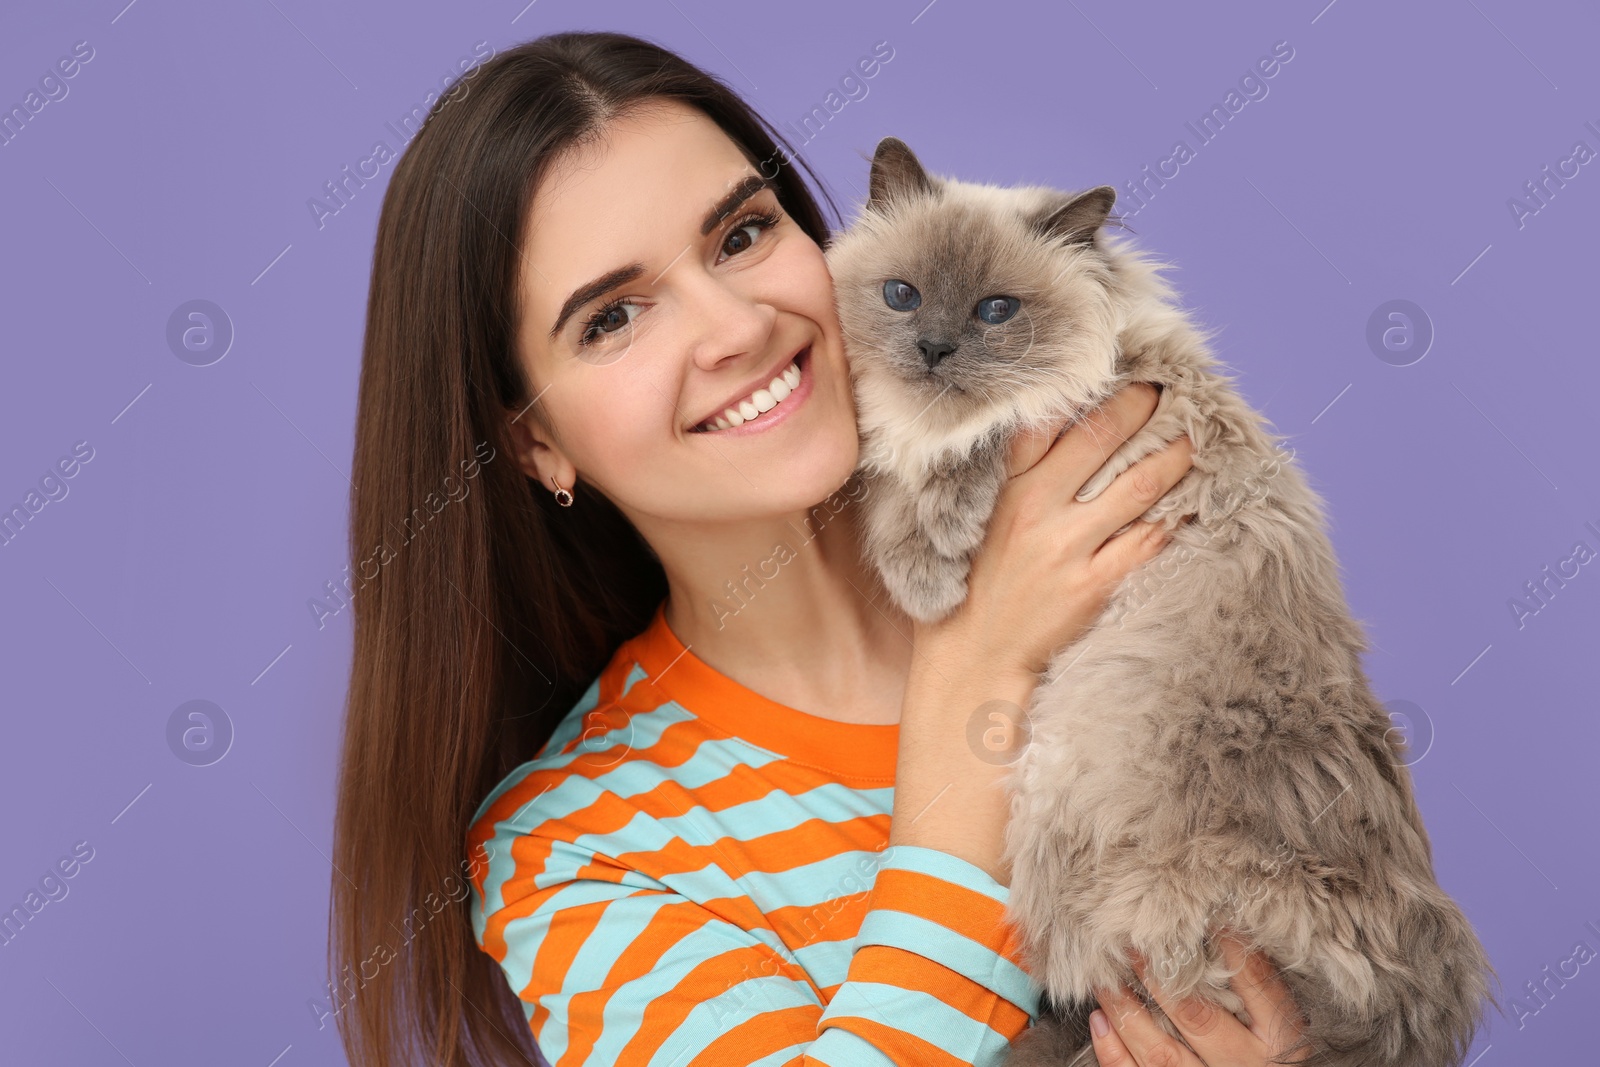 Photo of Happy woman with her cute cat on violet background